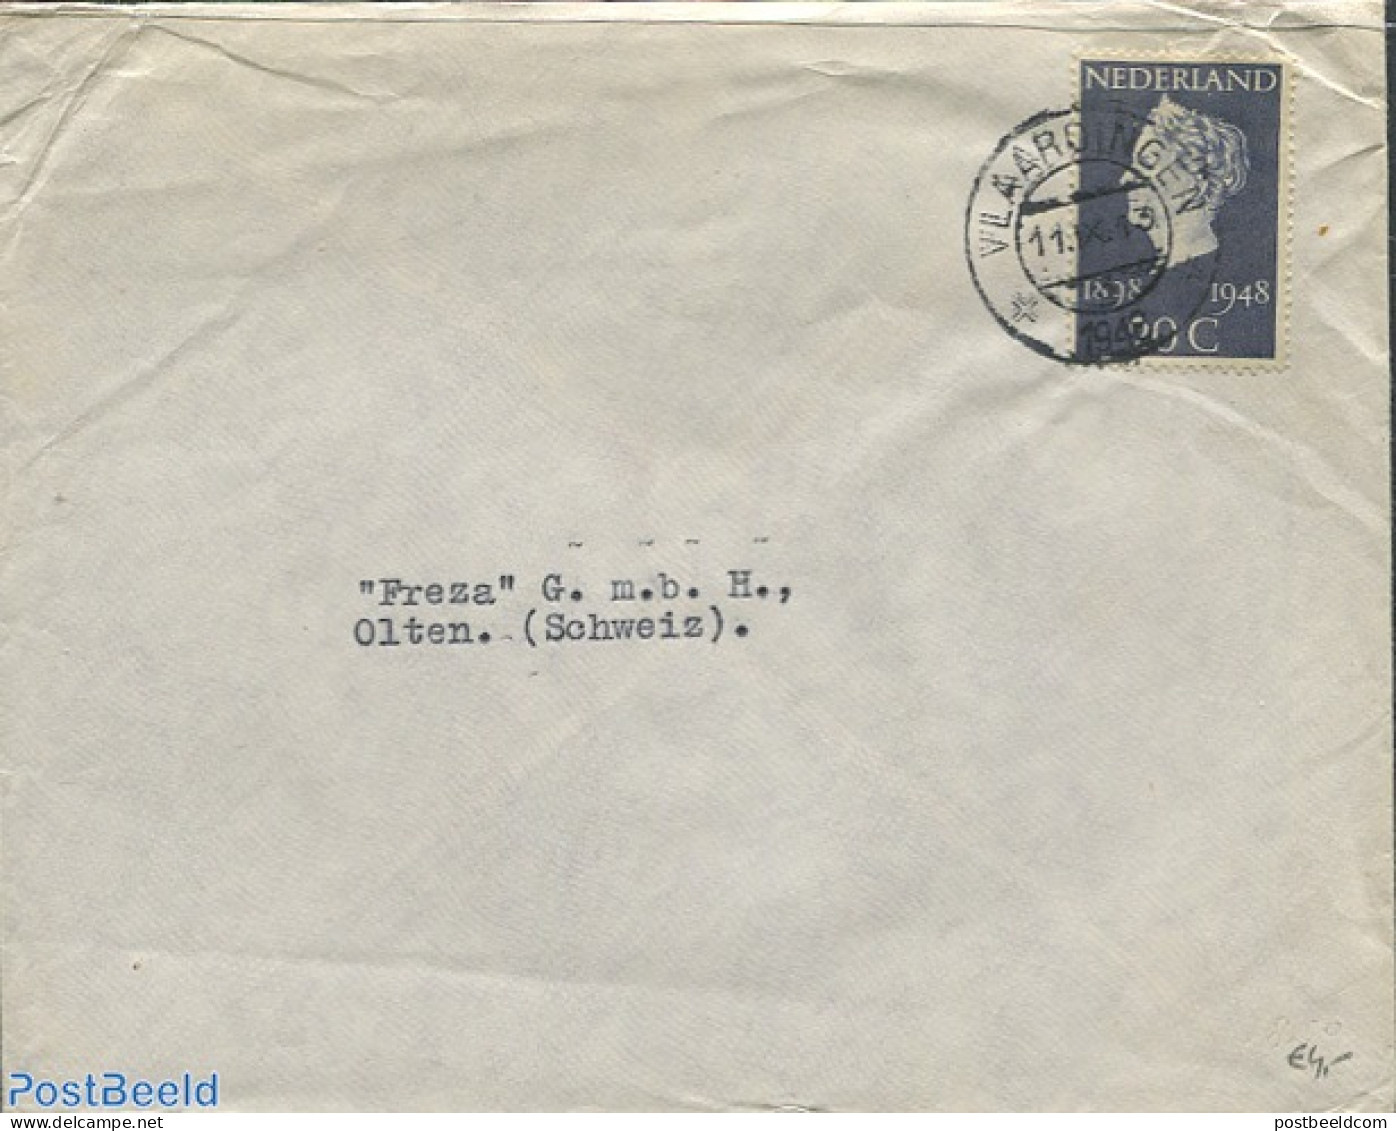 Netherlands 1948 Envelope With NVPH No. 505, Postal History, History - Kings & Queens (Royalty) - Covers & Documents